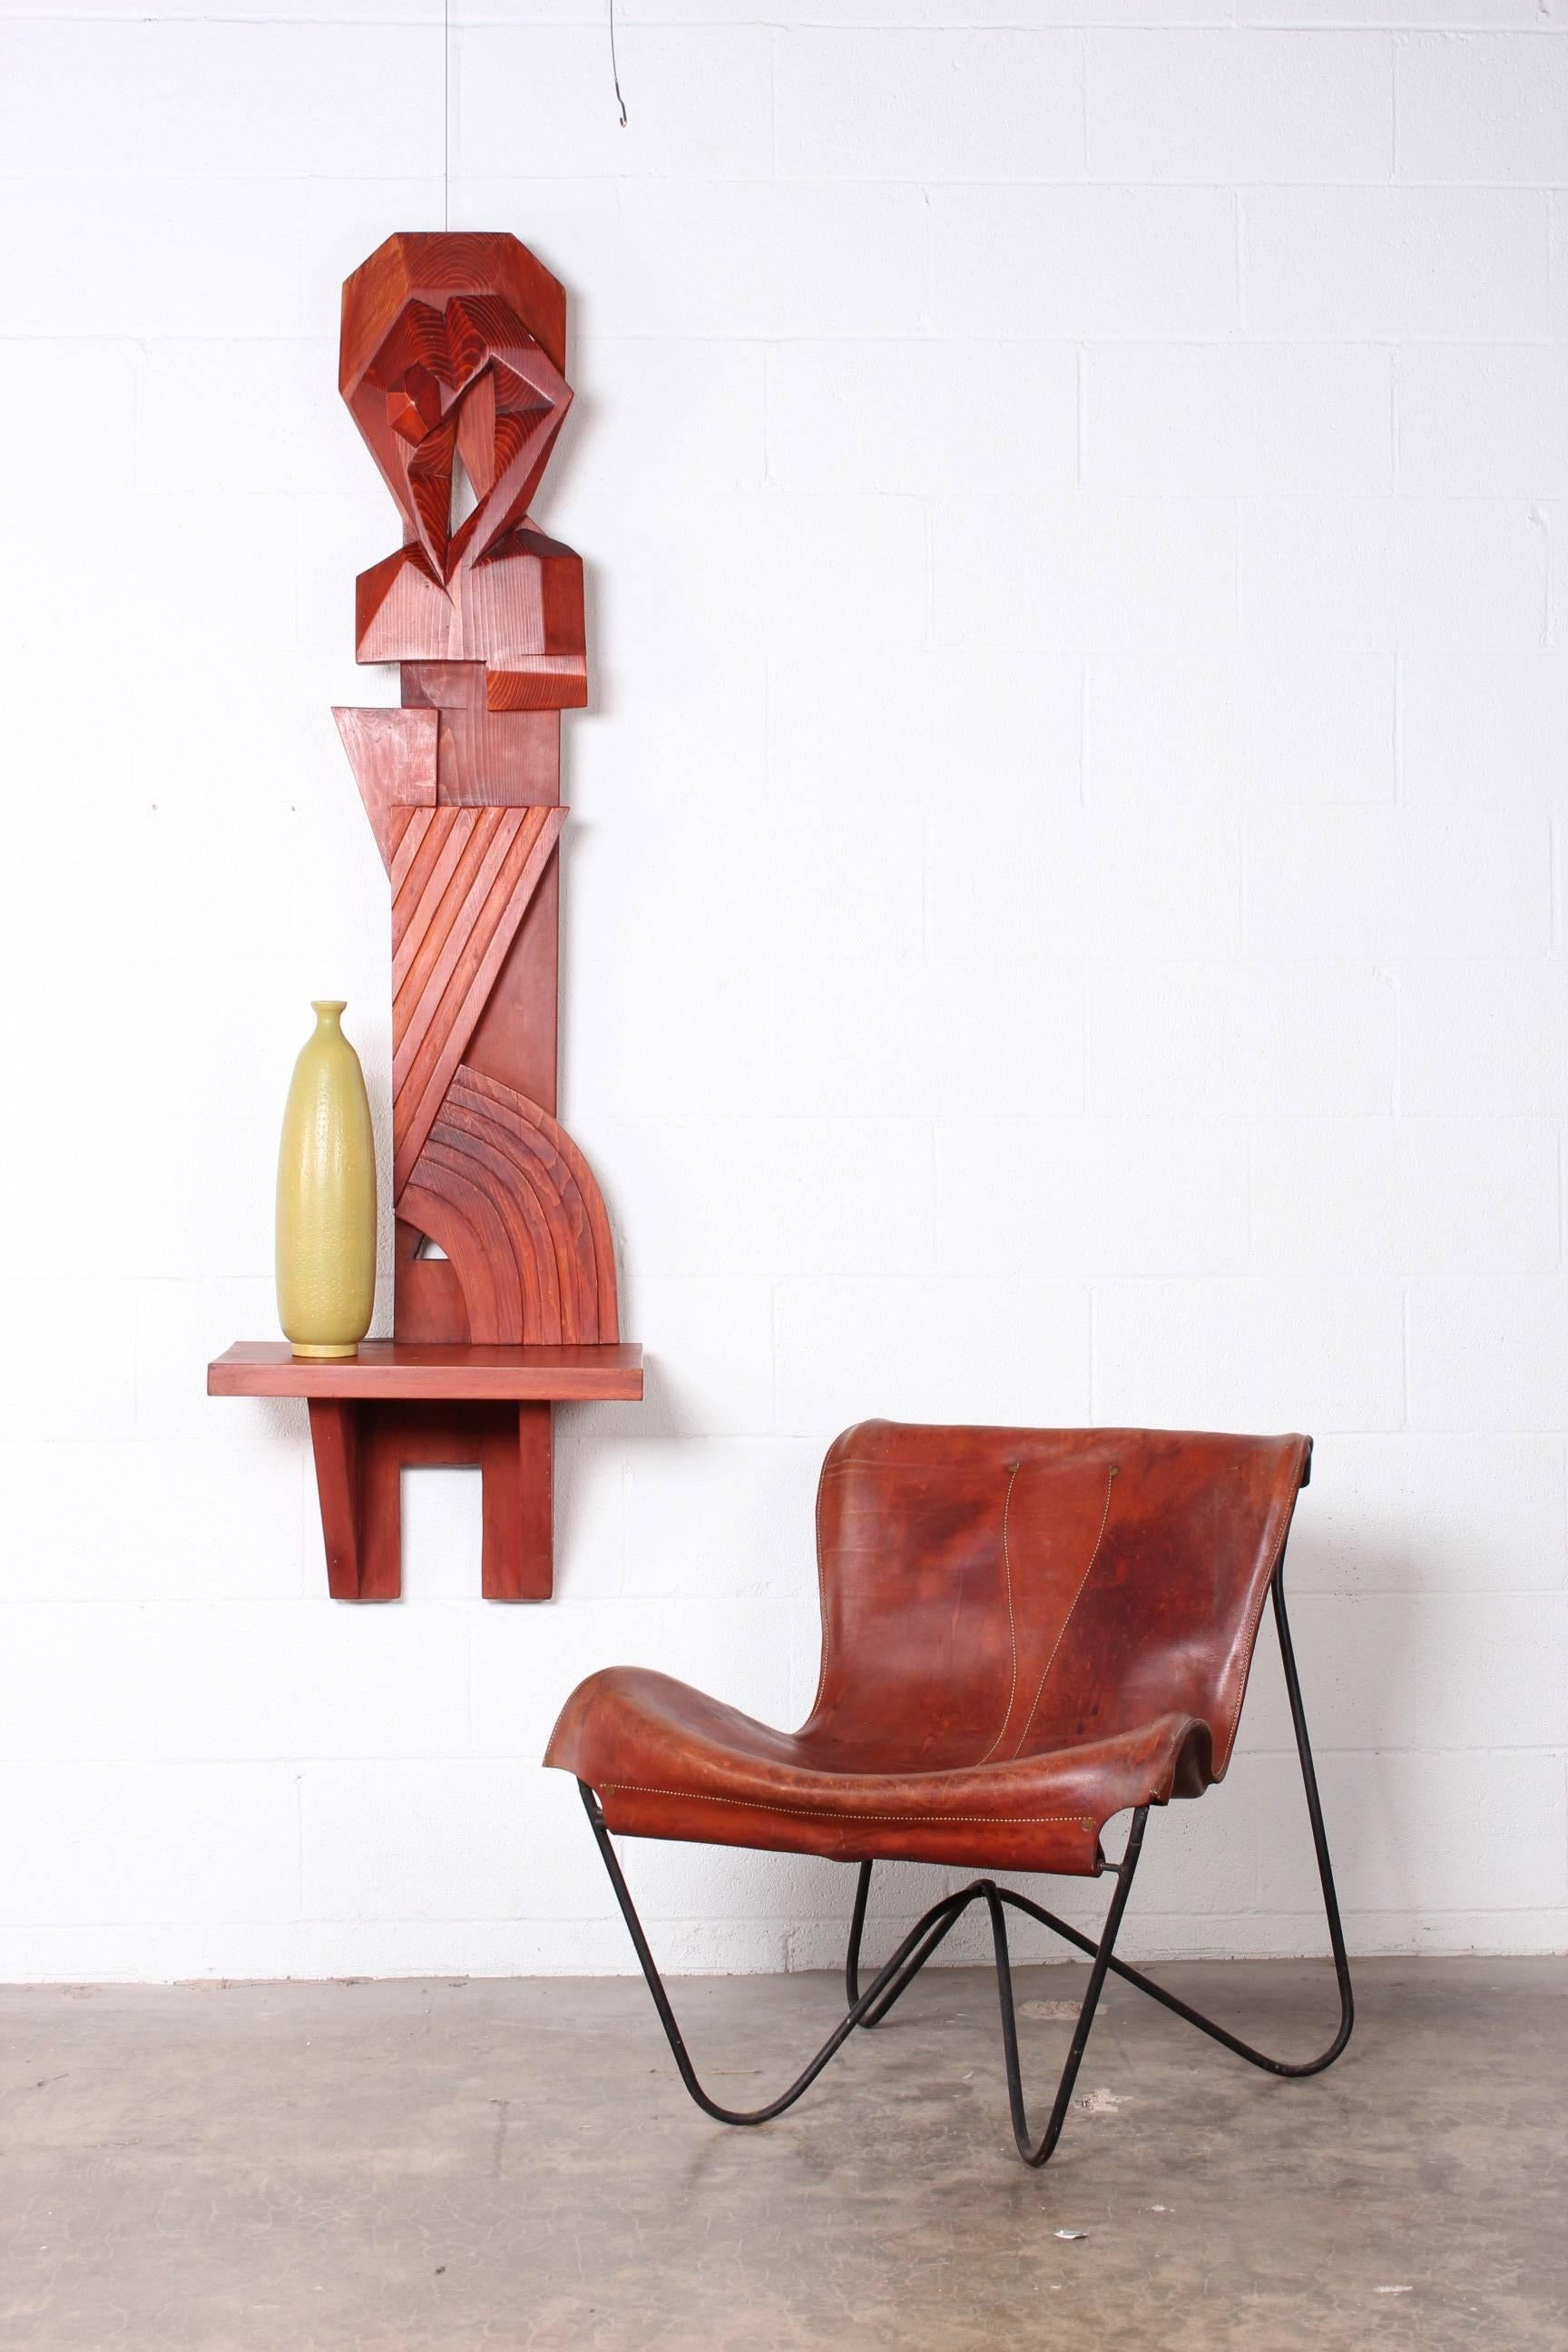 A carved wooden wall mount sculpture with shelf. Crafted by artist Victor McKechnie in 1988 and titled 